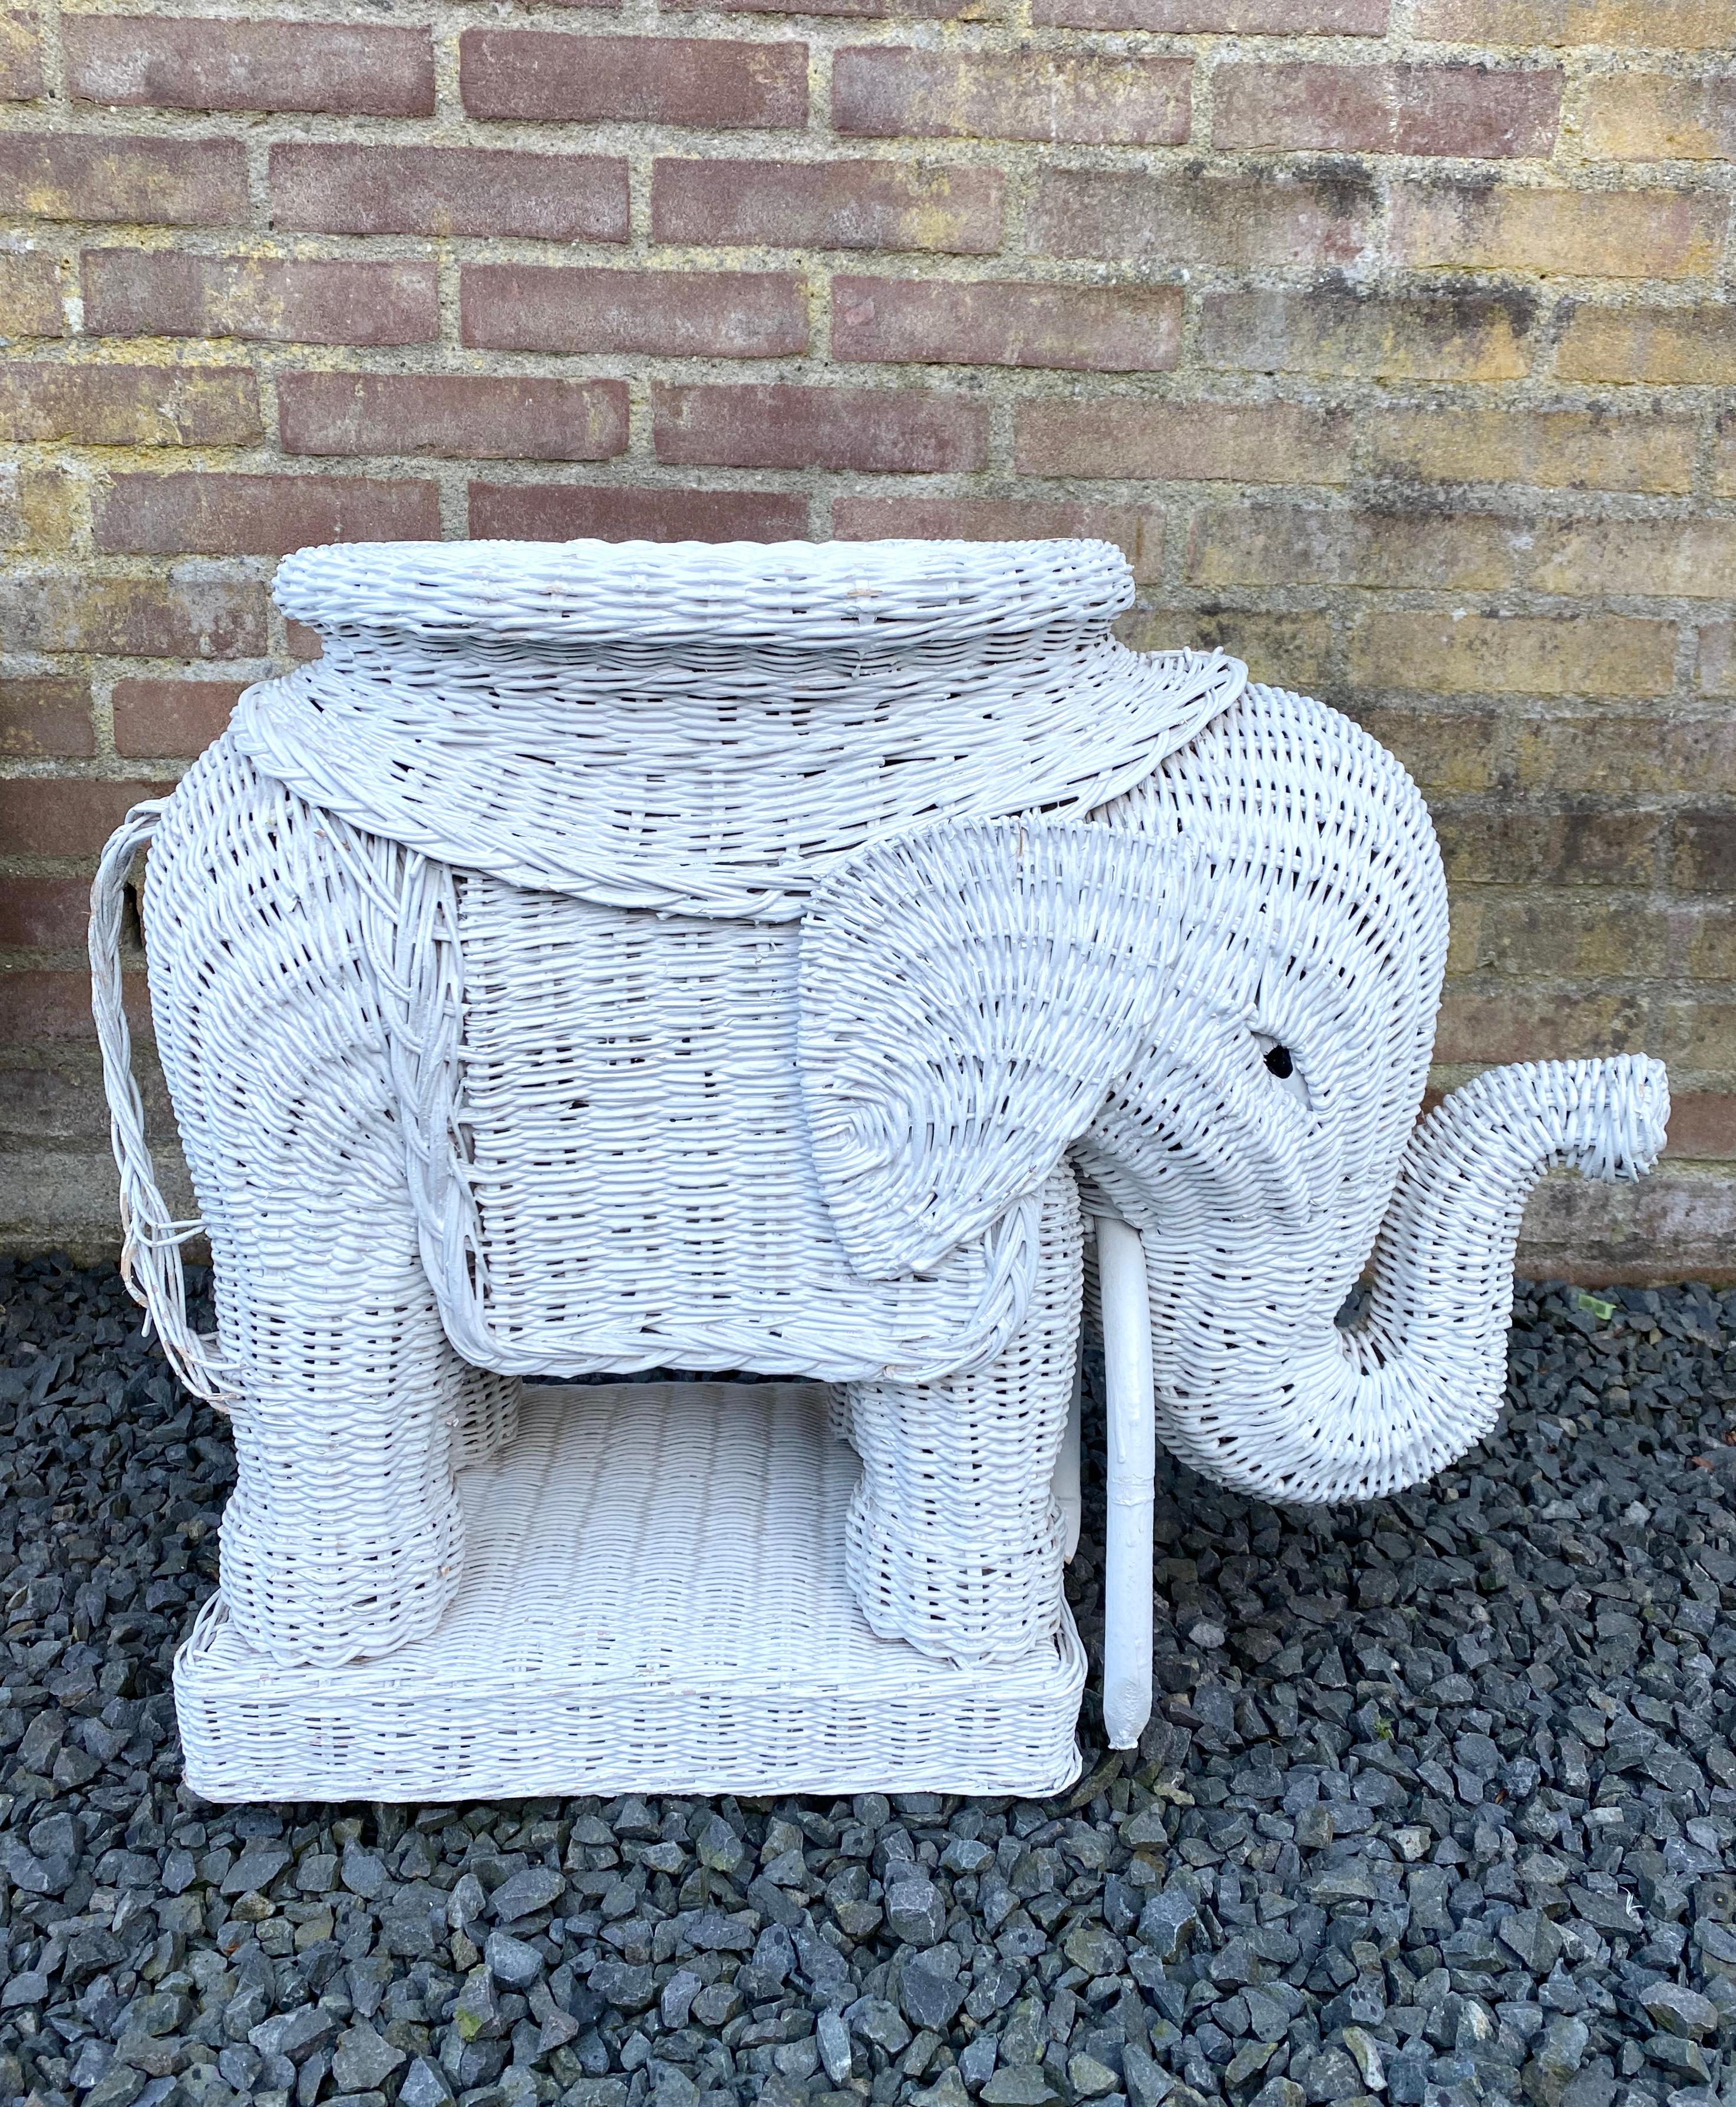 White lacquered woven wicker elephant which can be used for several purposes for instance a garden stool, side table, plant stand. Bohemian style. This piece remains in good condition with some loss of paint from its tail. It features an extra